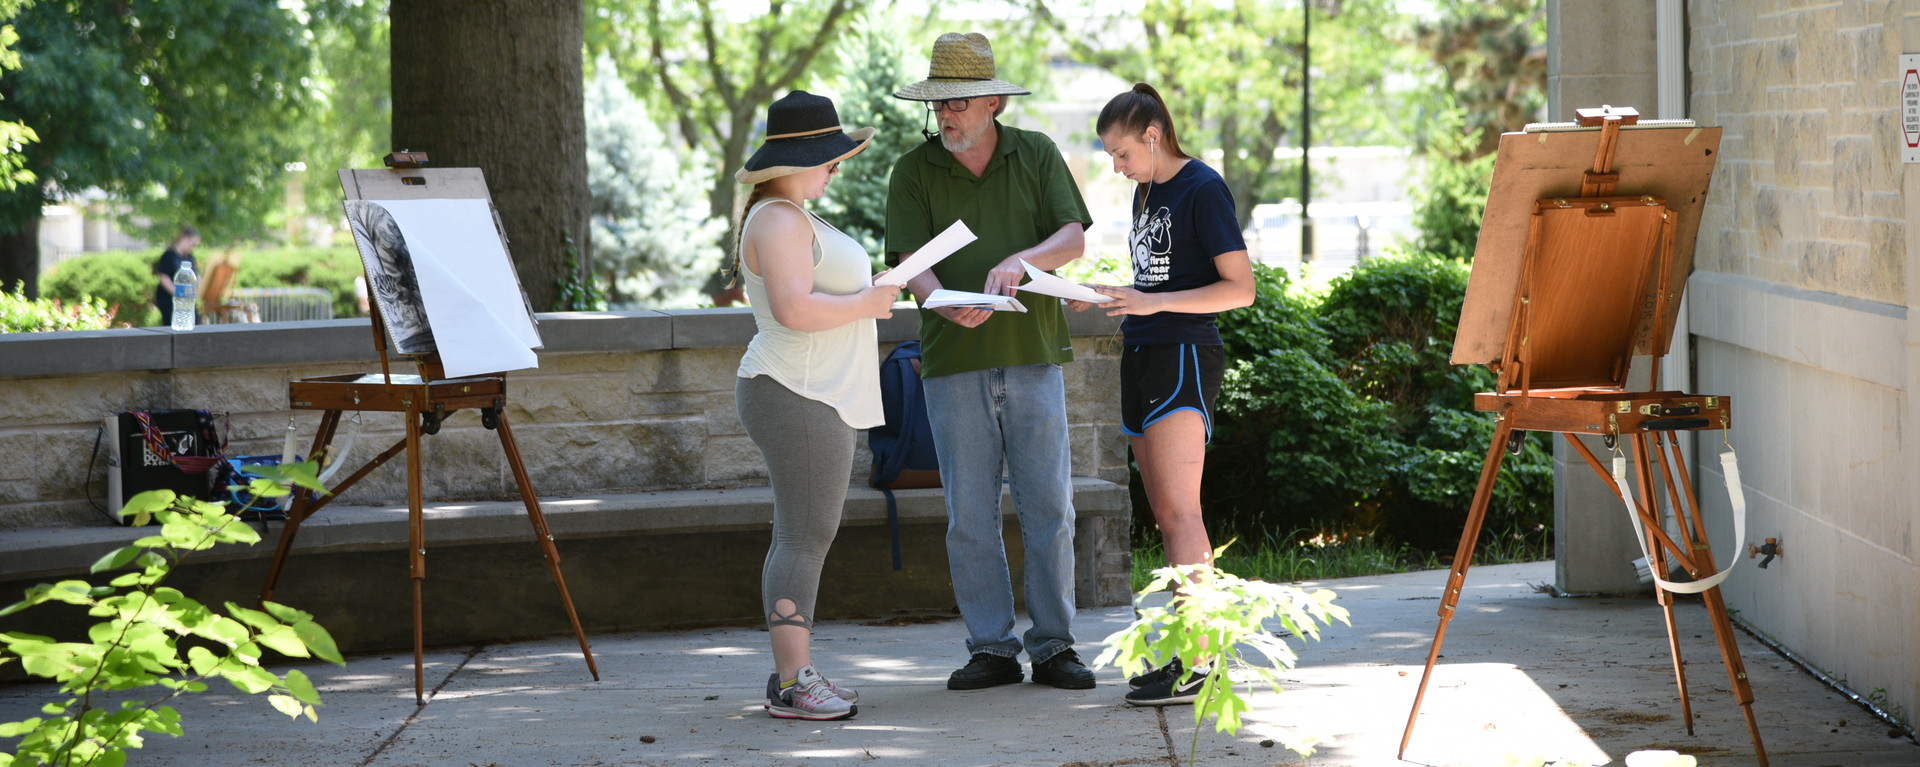 Professor talking with students outside while drawing